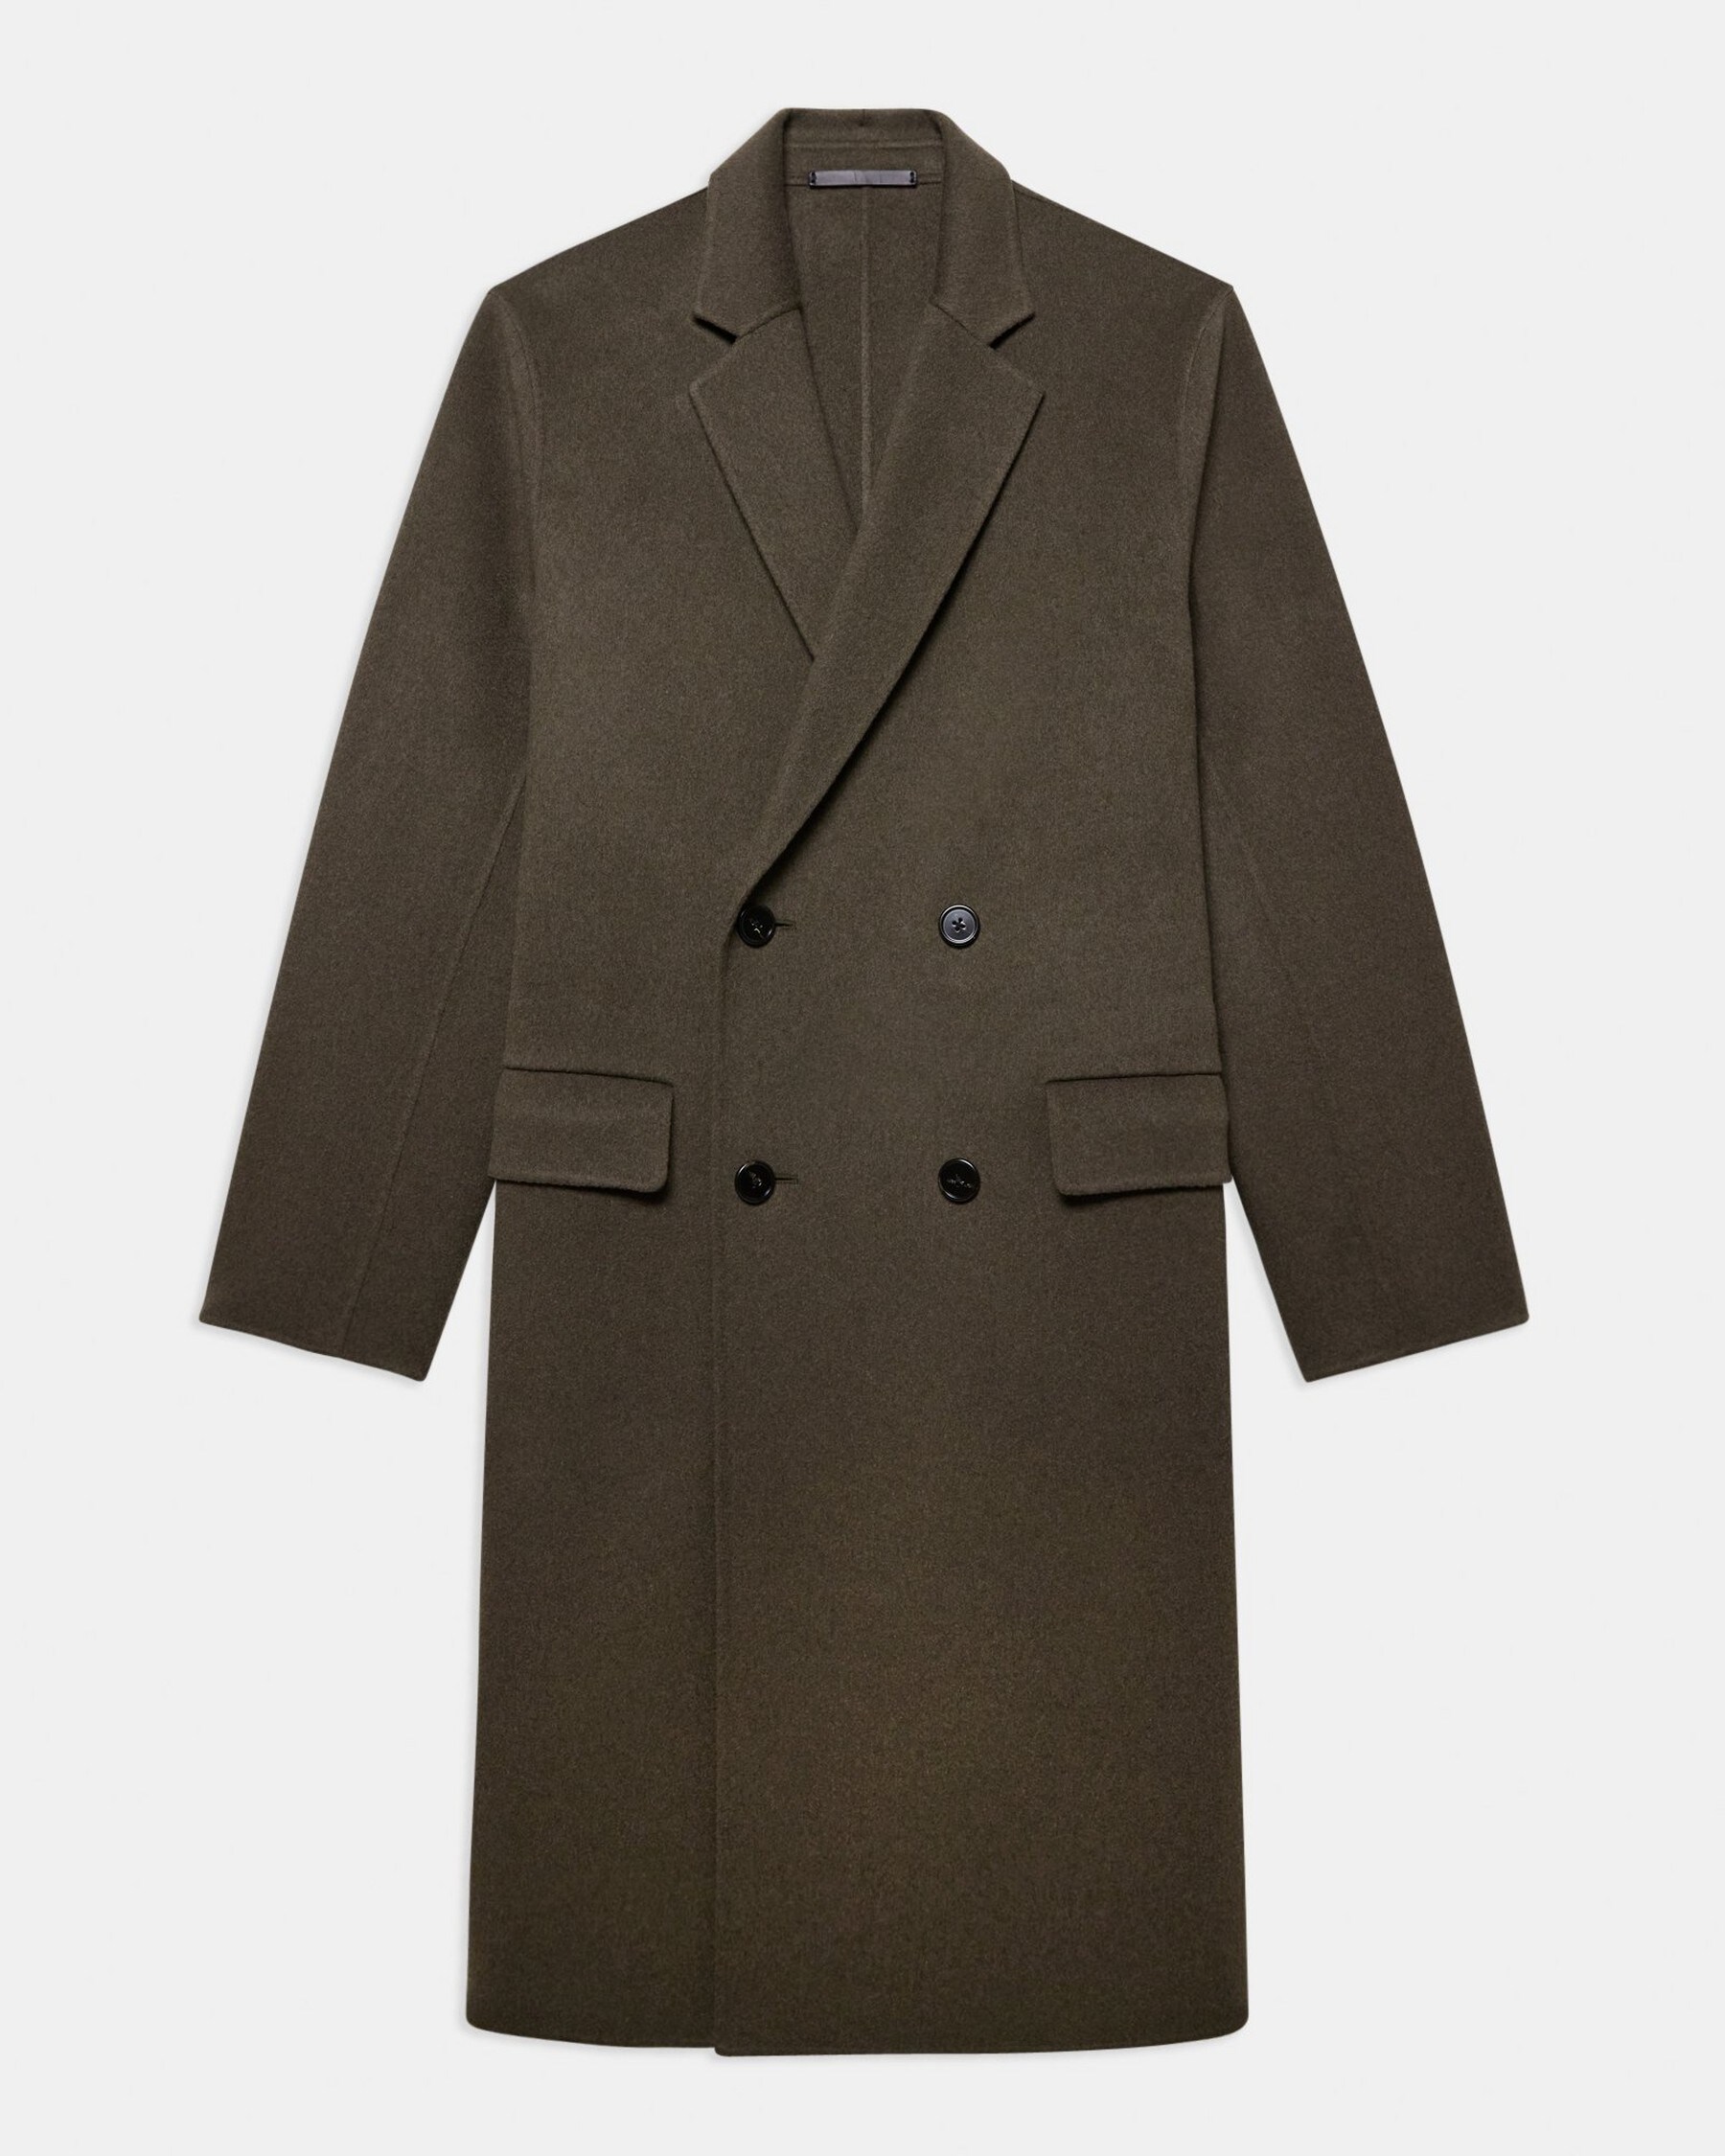 Suffolk Coat in Double-Face Wool-Cashmere